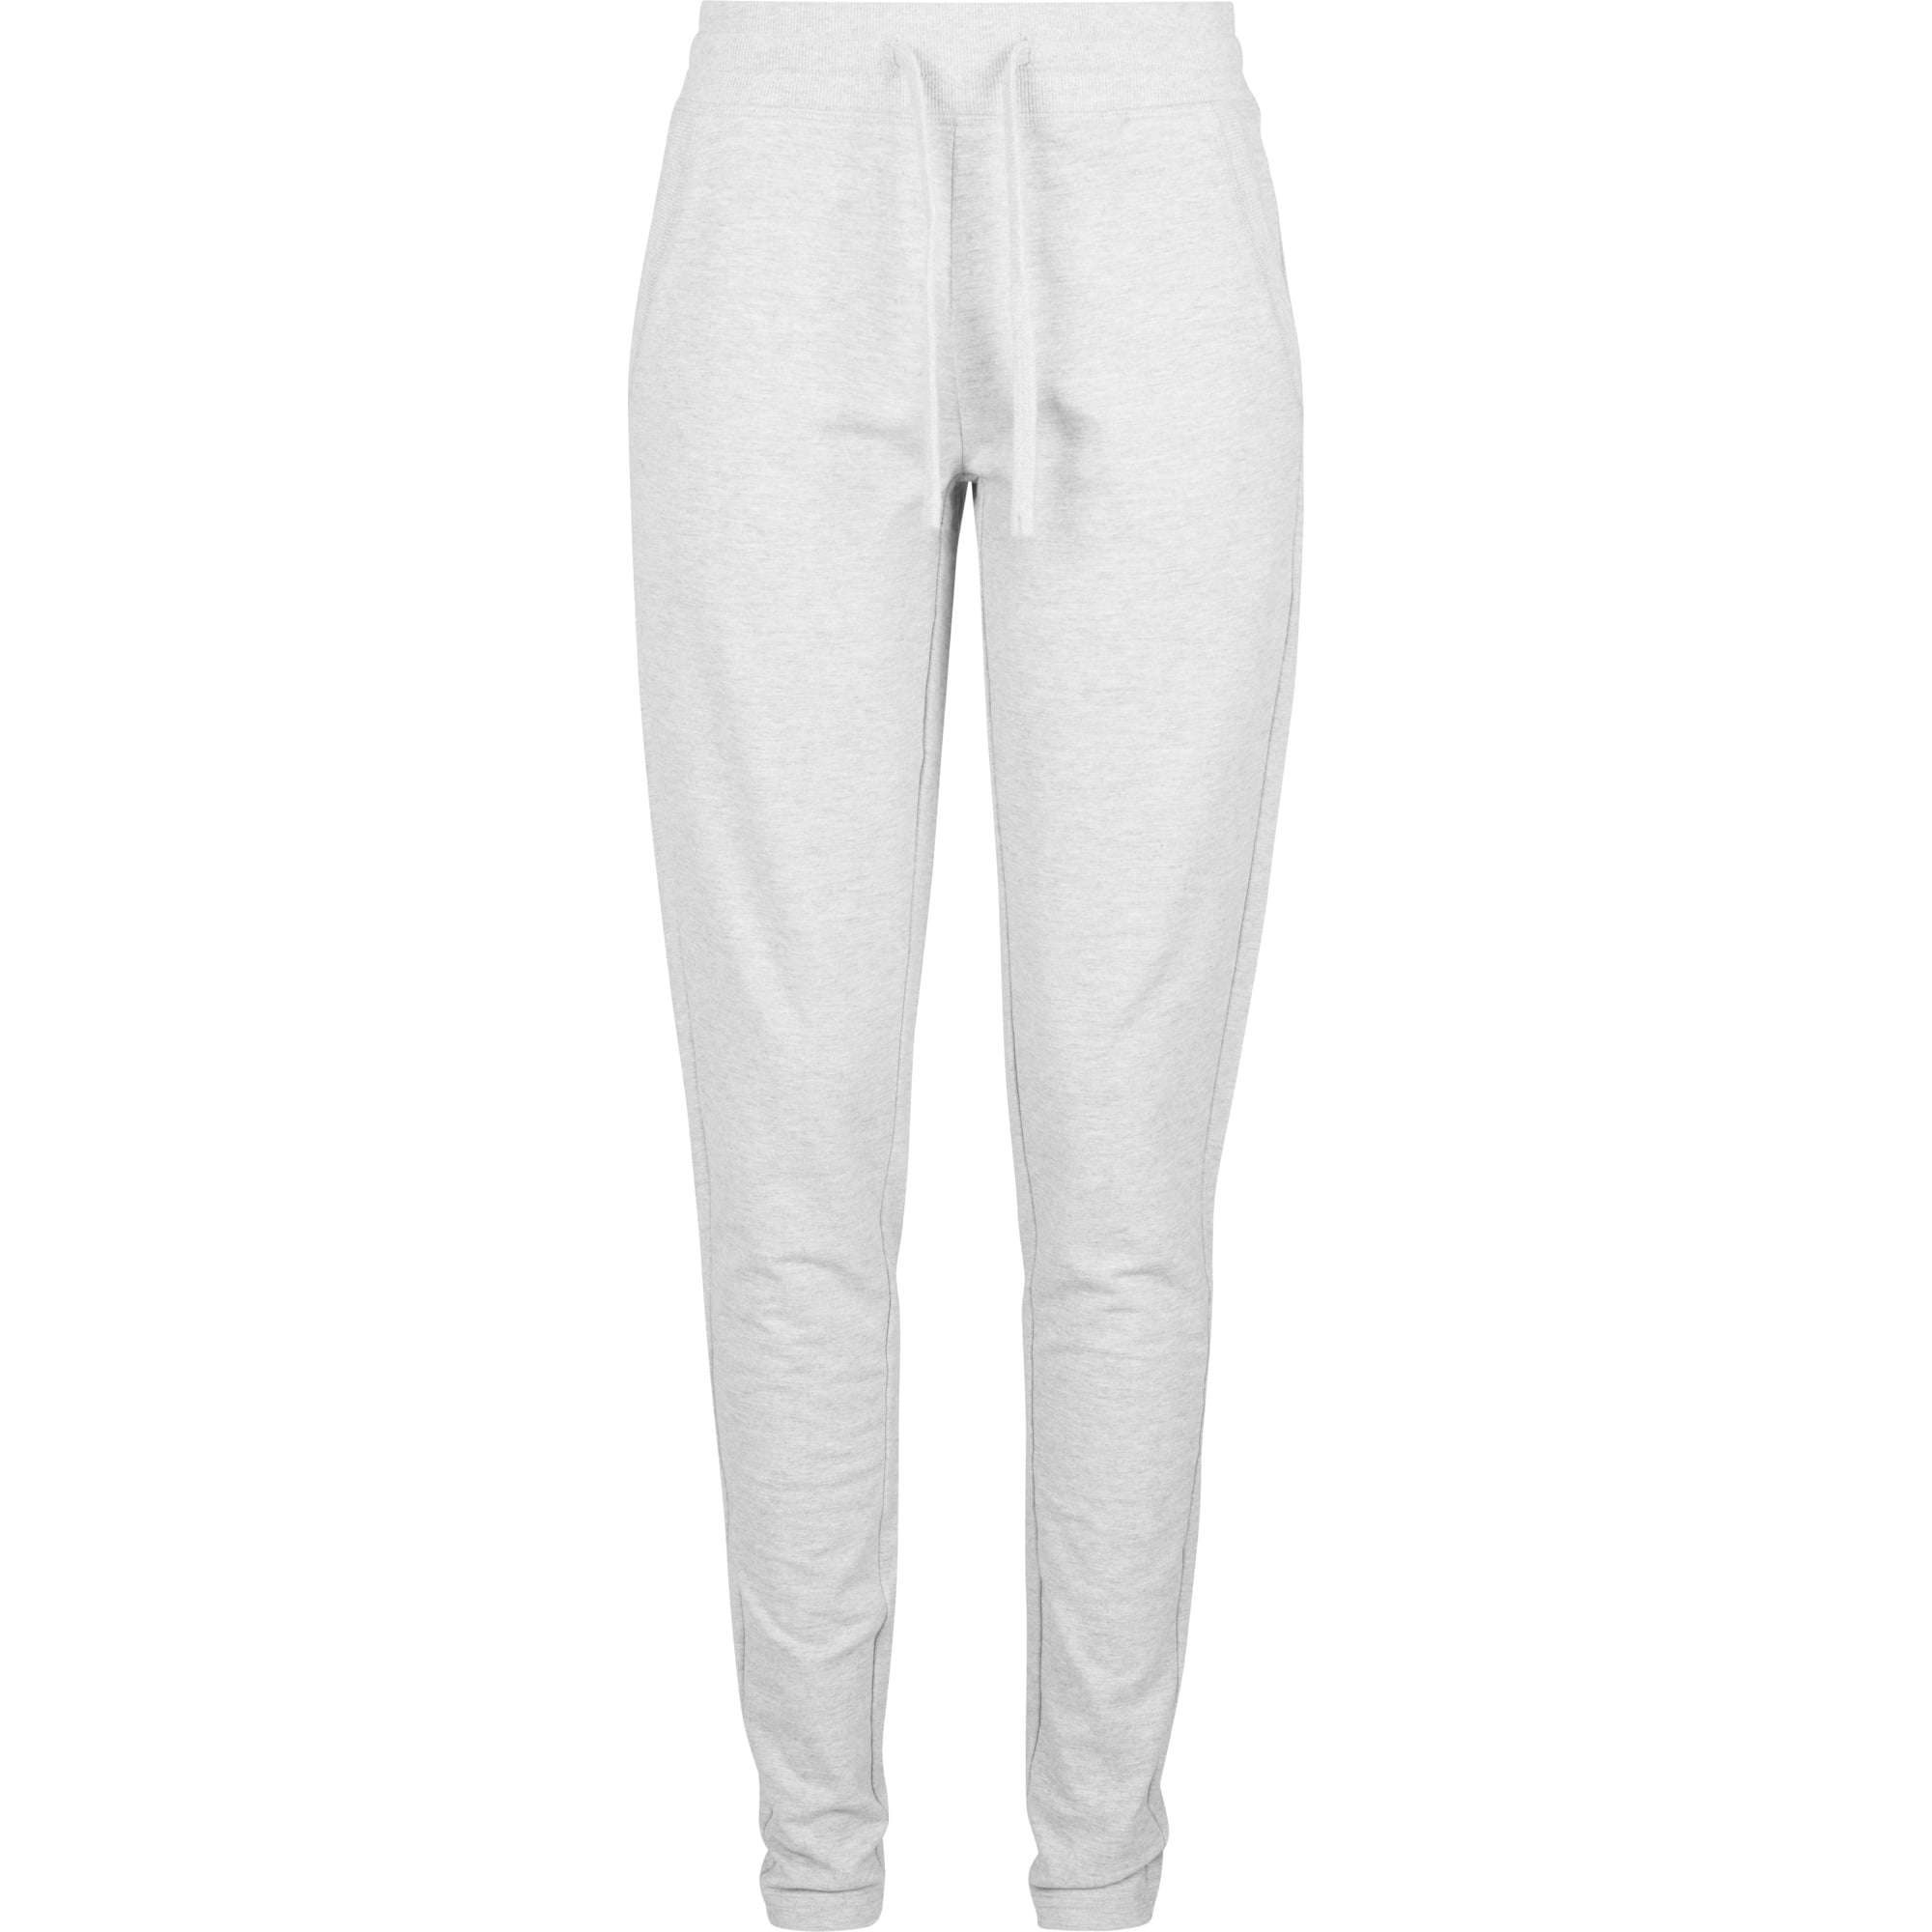 Build Your Brand Womens/Ladies Terry Jogging Long Pants | Walmart Canada